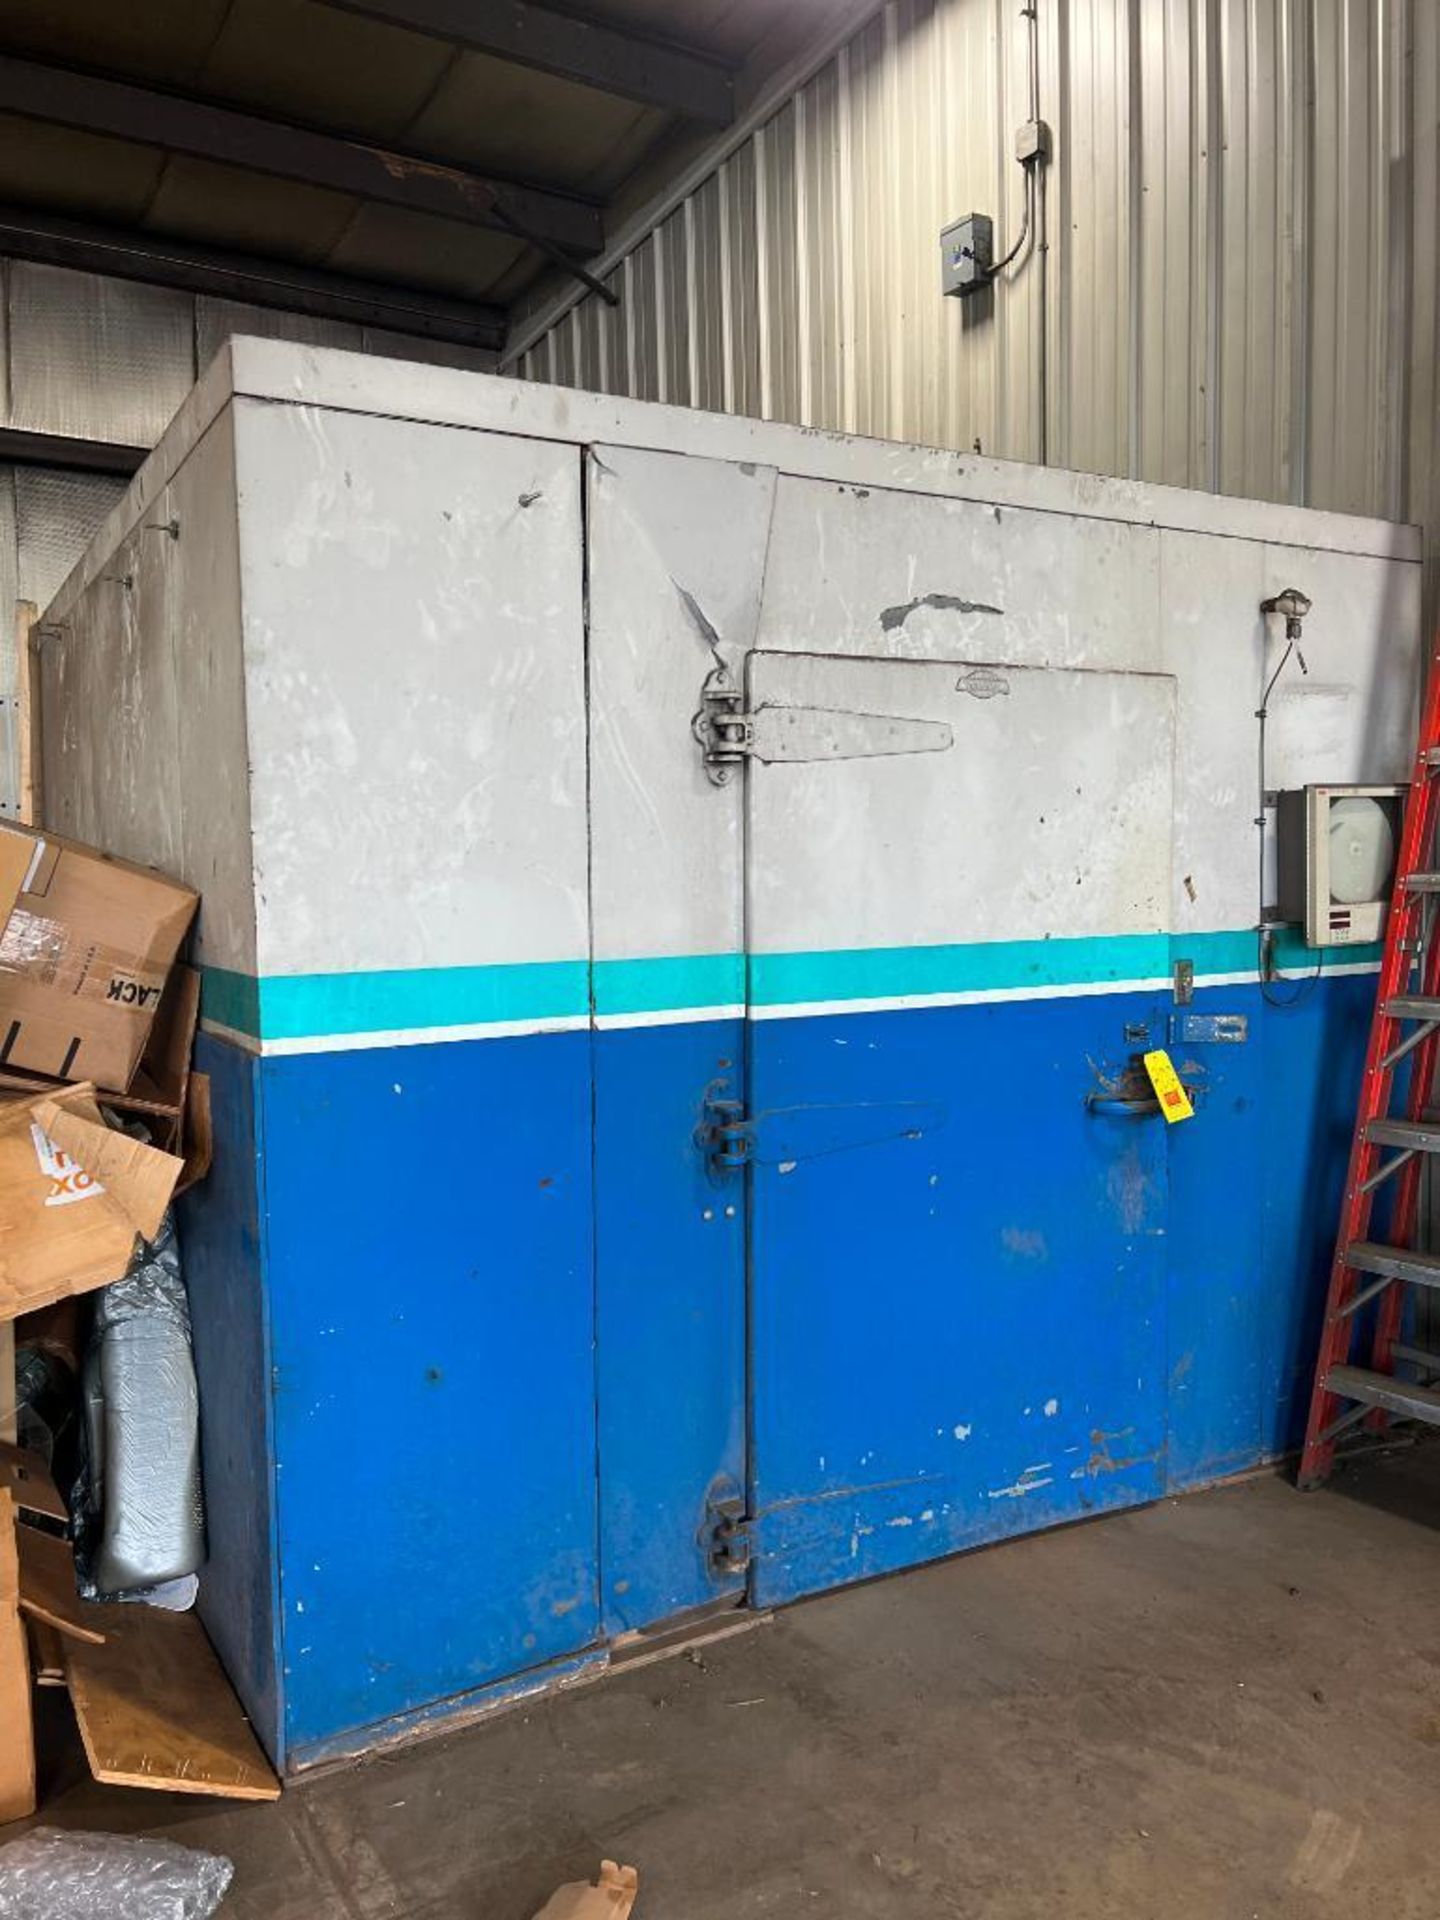 Federal Walk-In Cooler with Evaporative Cooler, Dimensions = 11' x 10' x 94" - Rigging Fees: $2200 - Image 3 of 5